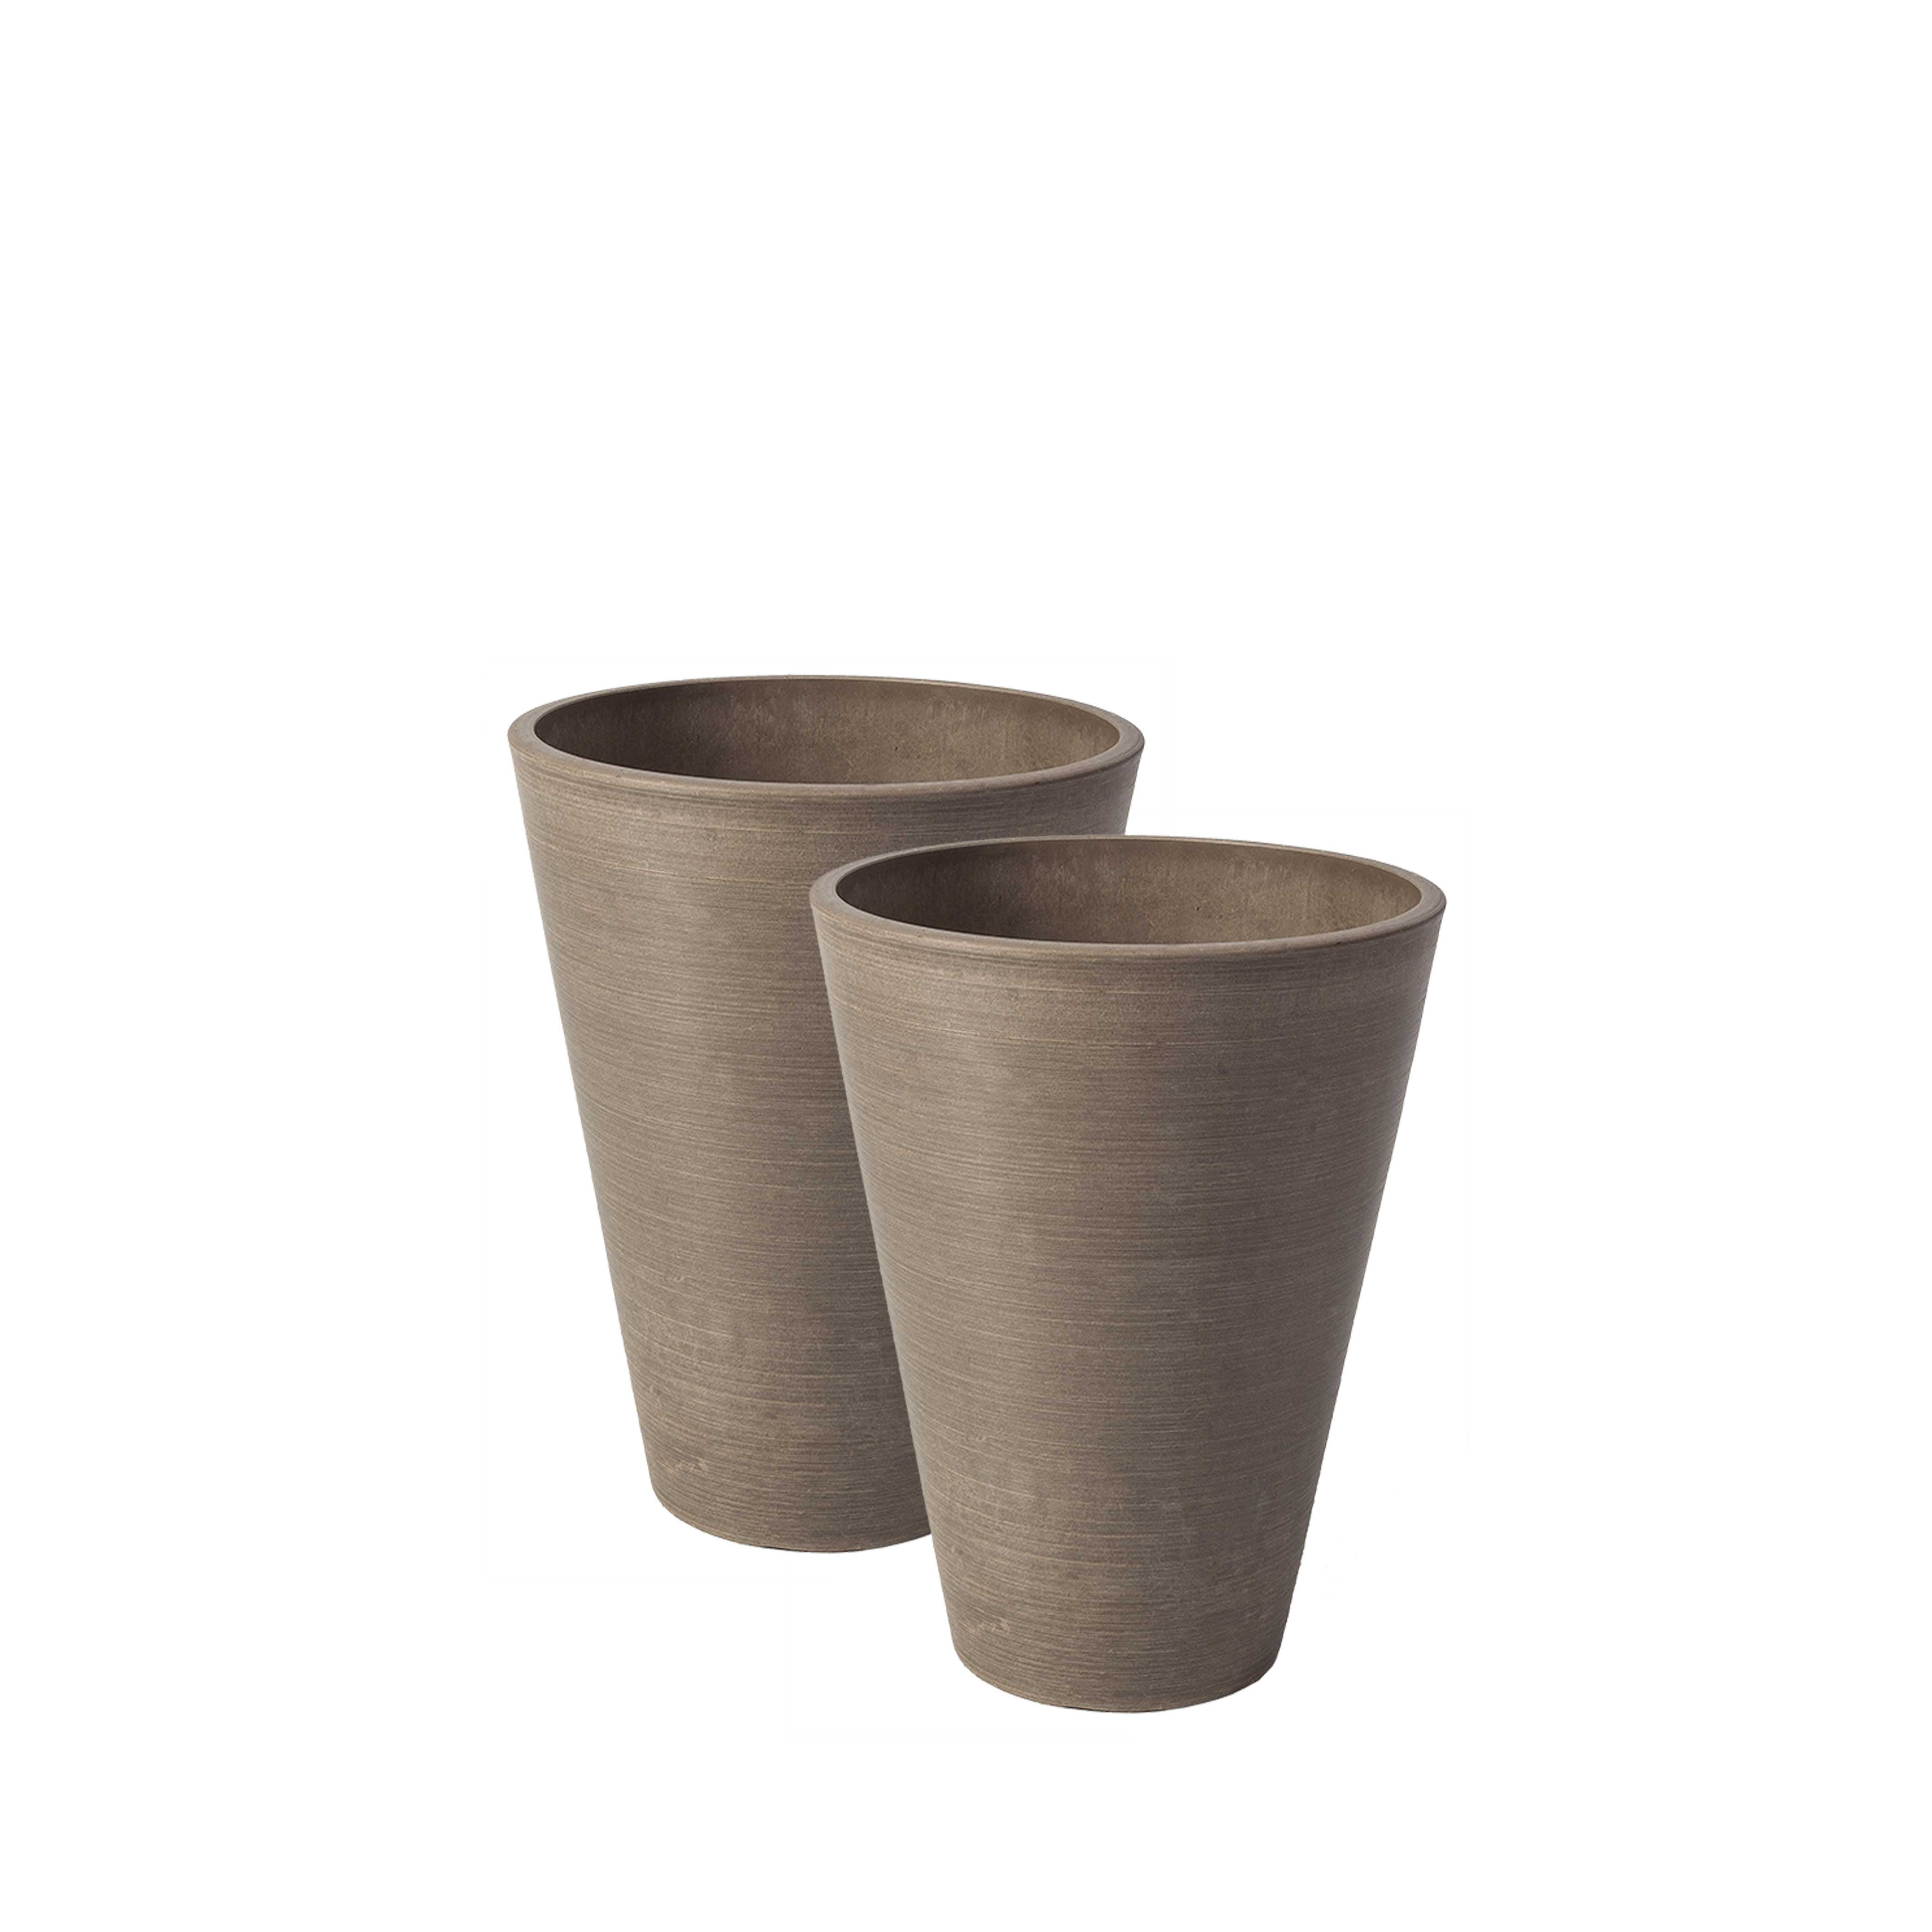 16826 Valencia 10 In. Dia. By 13 In. 2 Round Taper Planters, Spun Taupe - Pack Of 2